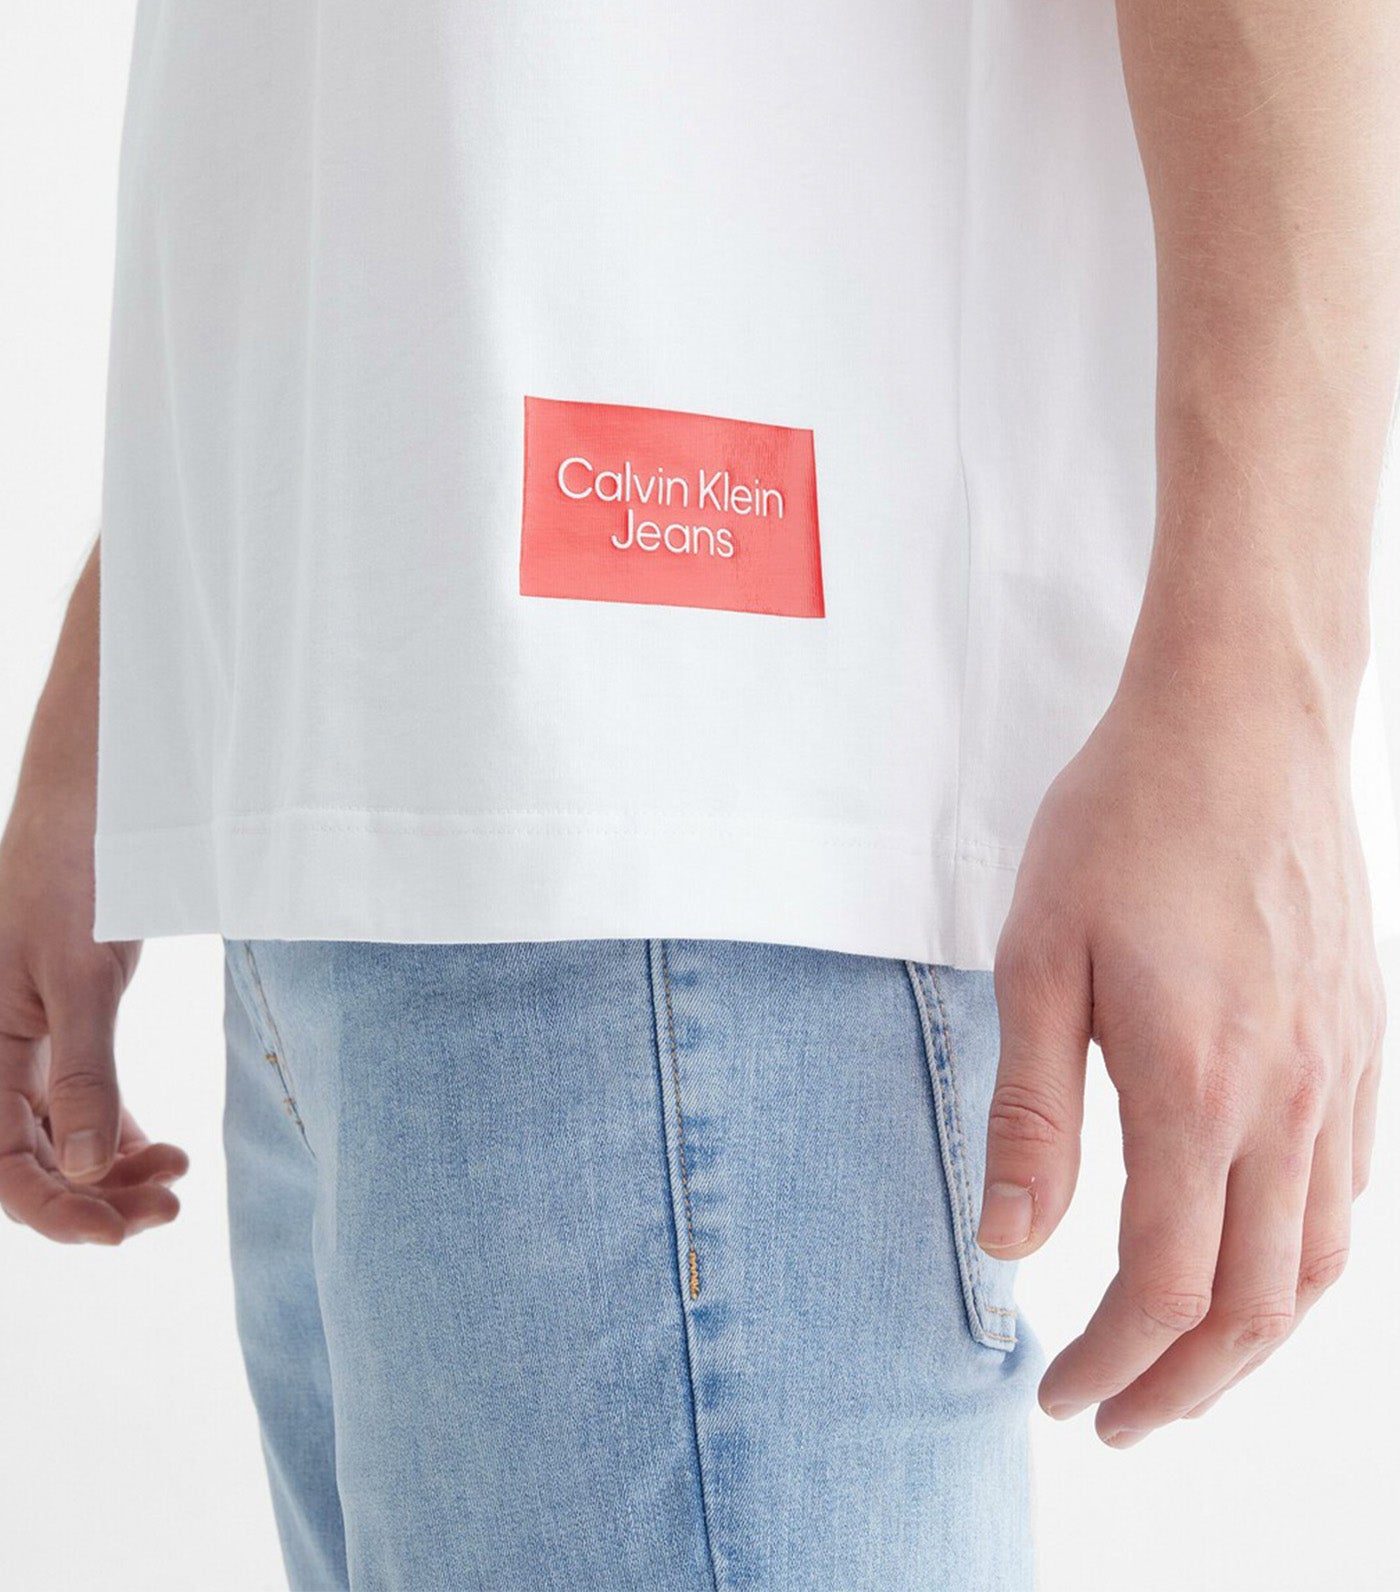 Relaxed Tee White